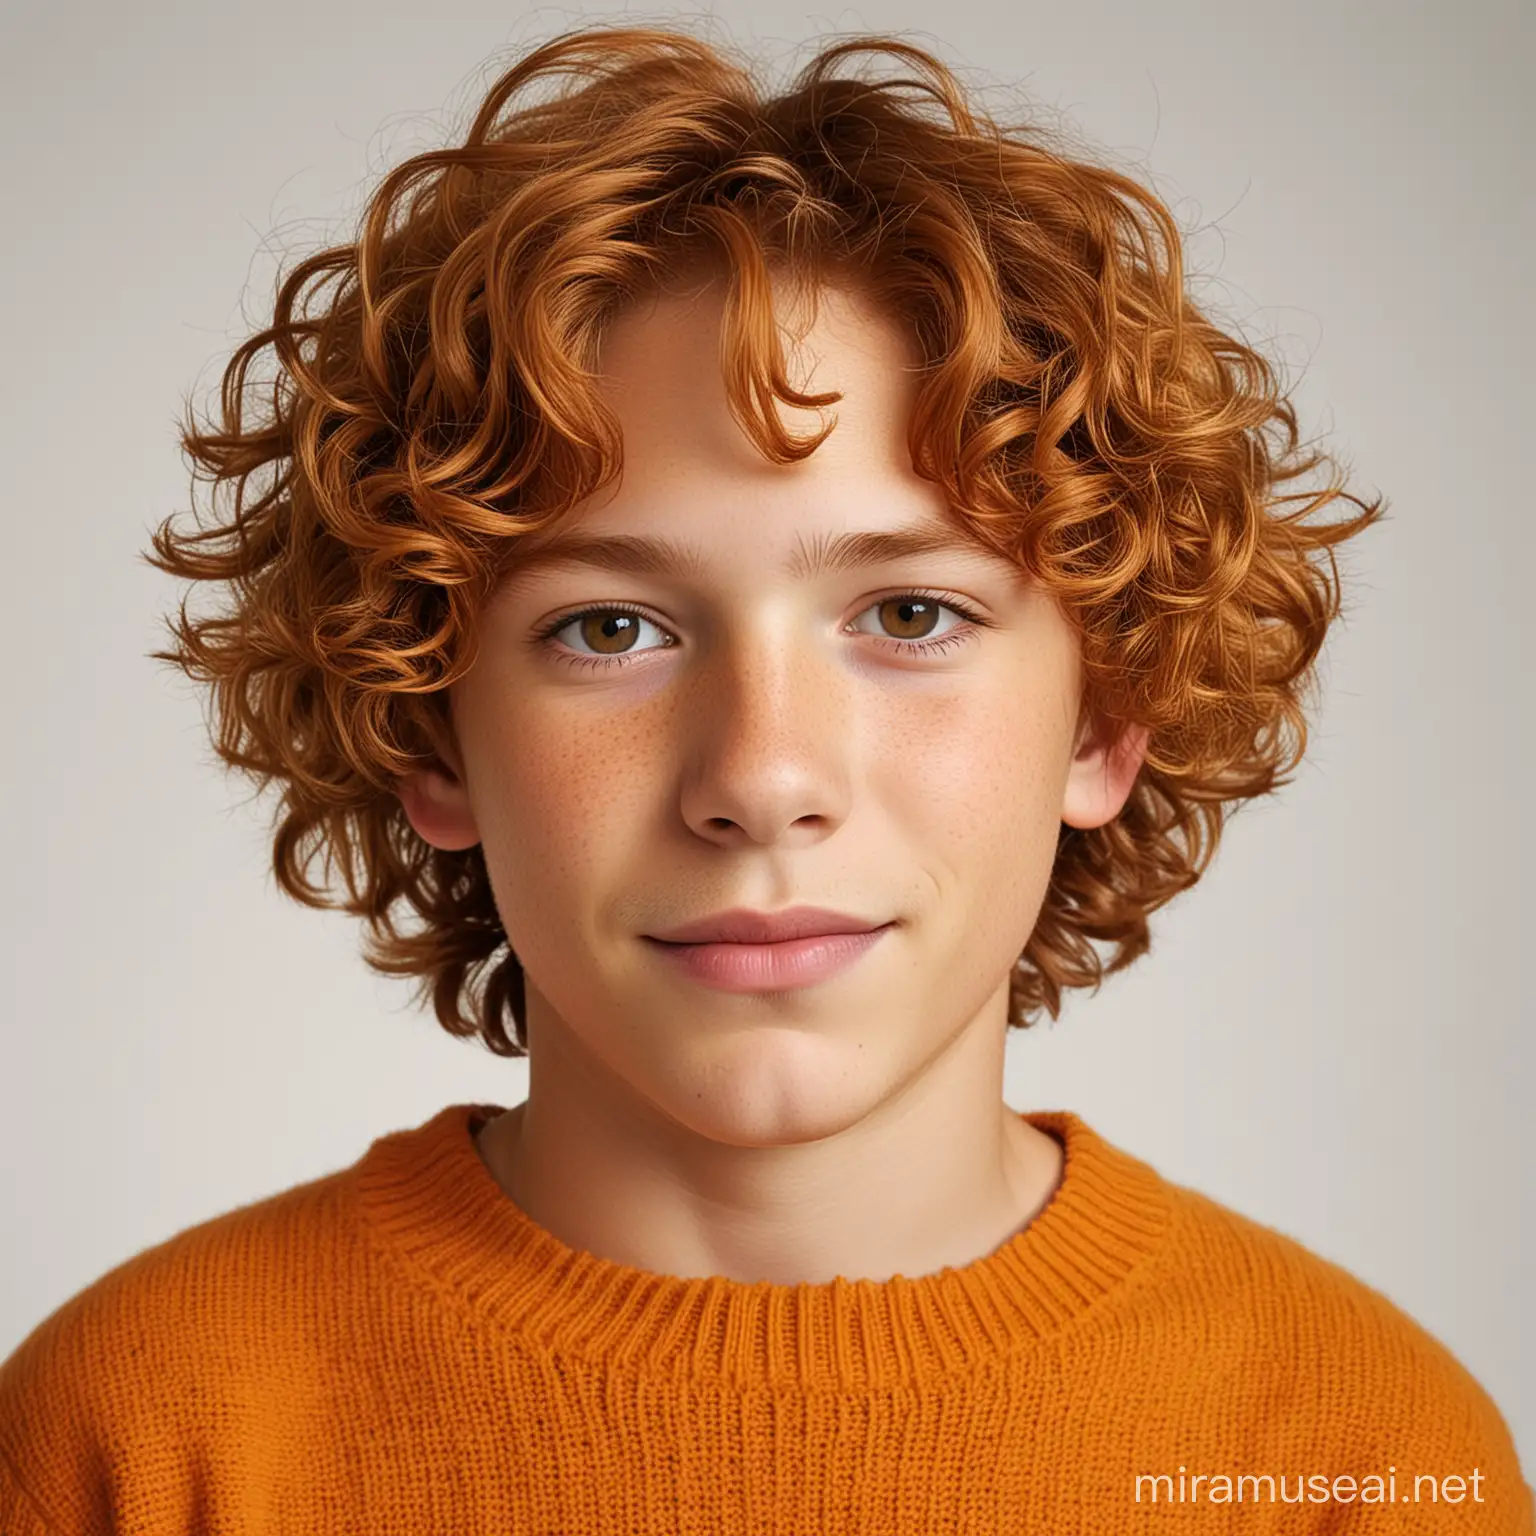 a Hawaiian 13 year old boy with wavy ginger hair and brown eyes who wears an orange sweater with a white background